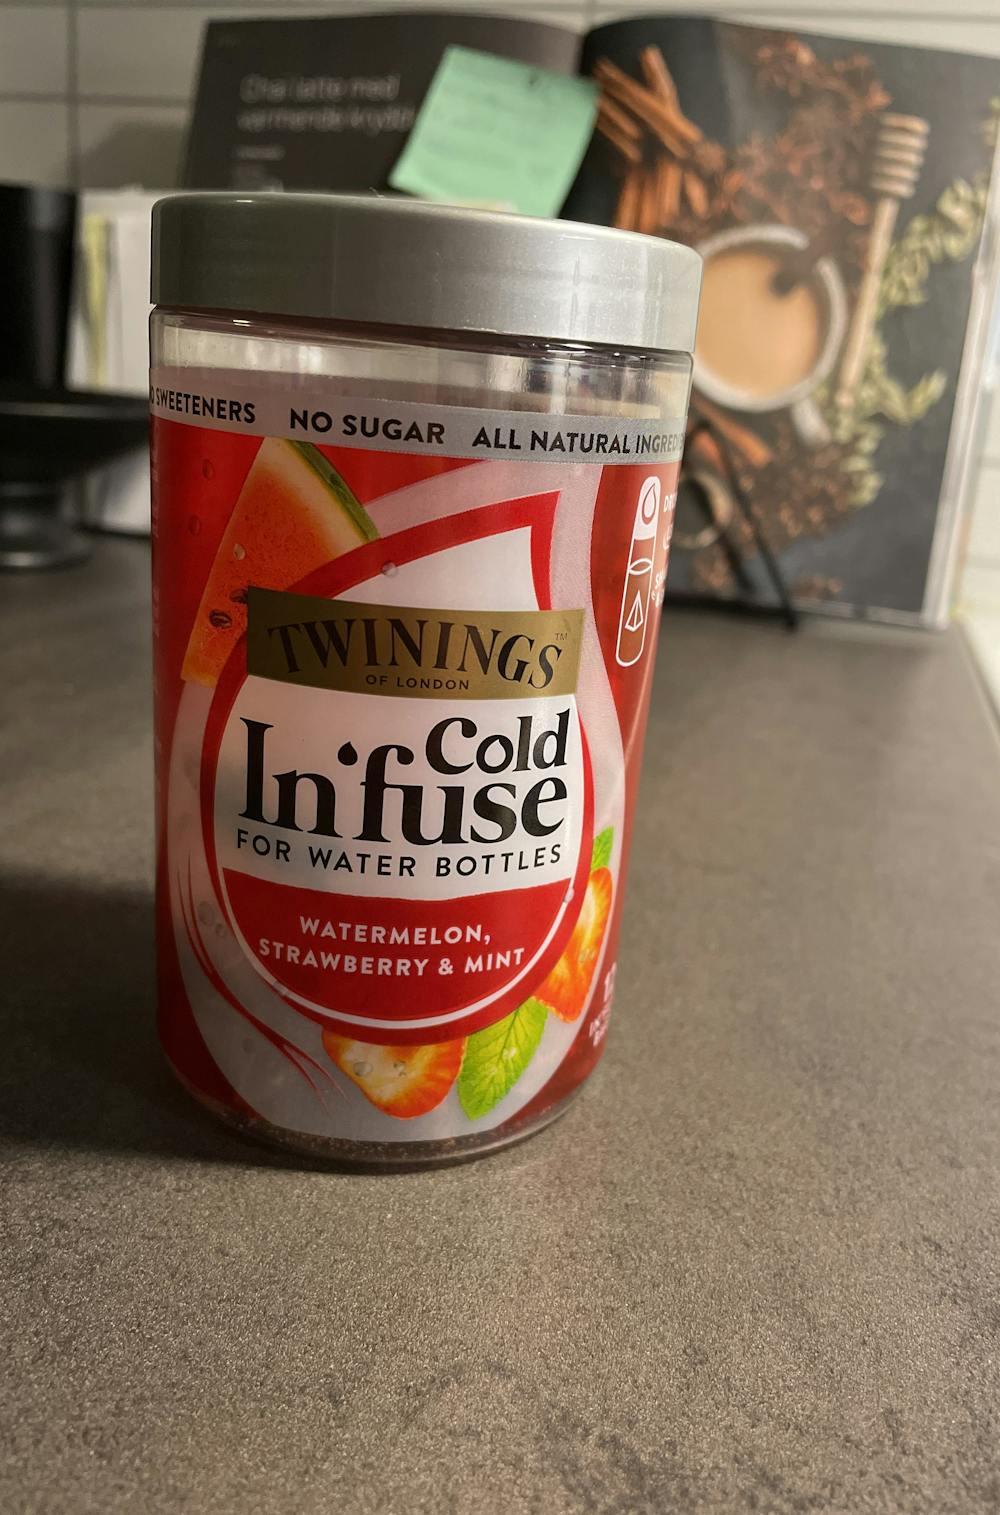 Cold infuse for water bottles, Twinings of London